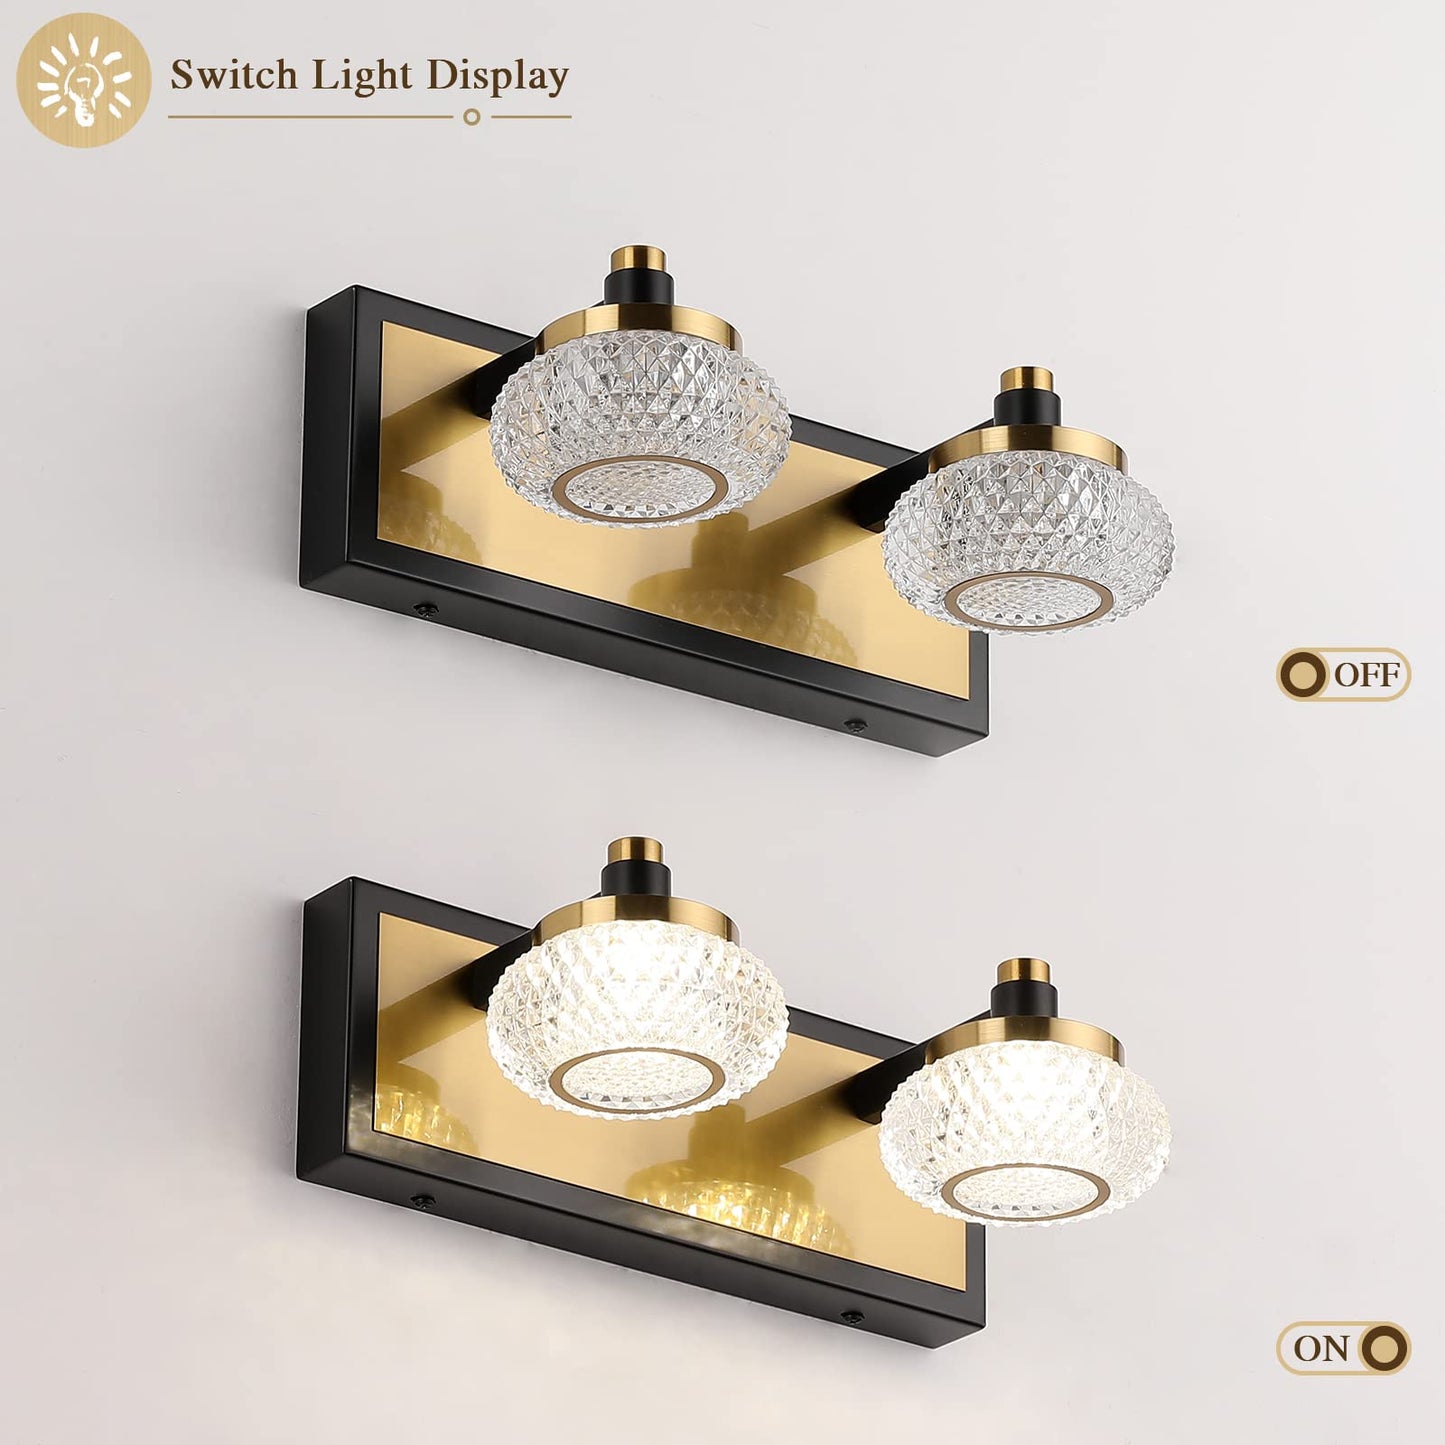 7Degobii 2-Light Bathroom Vanity Light Fixture Over Mirror Modern LED Acrylic Wall Lights for Bathroom 12" Inch Long Dimmable Black and Gold Color 4000K 10W 110V AC.